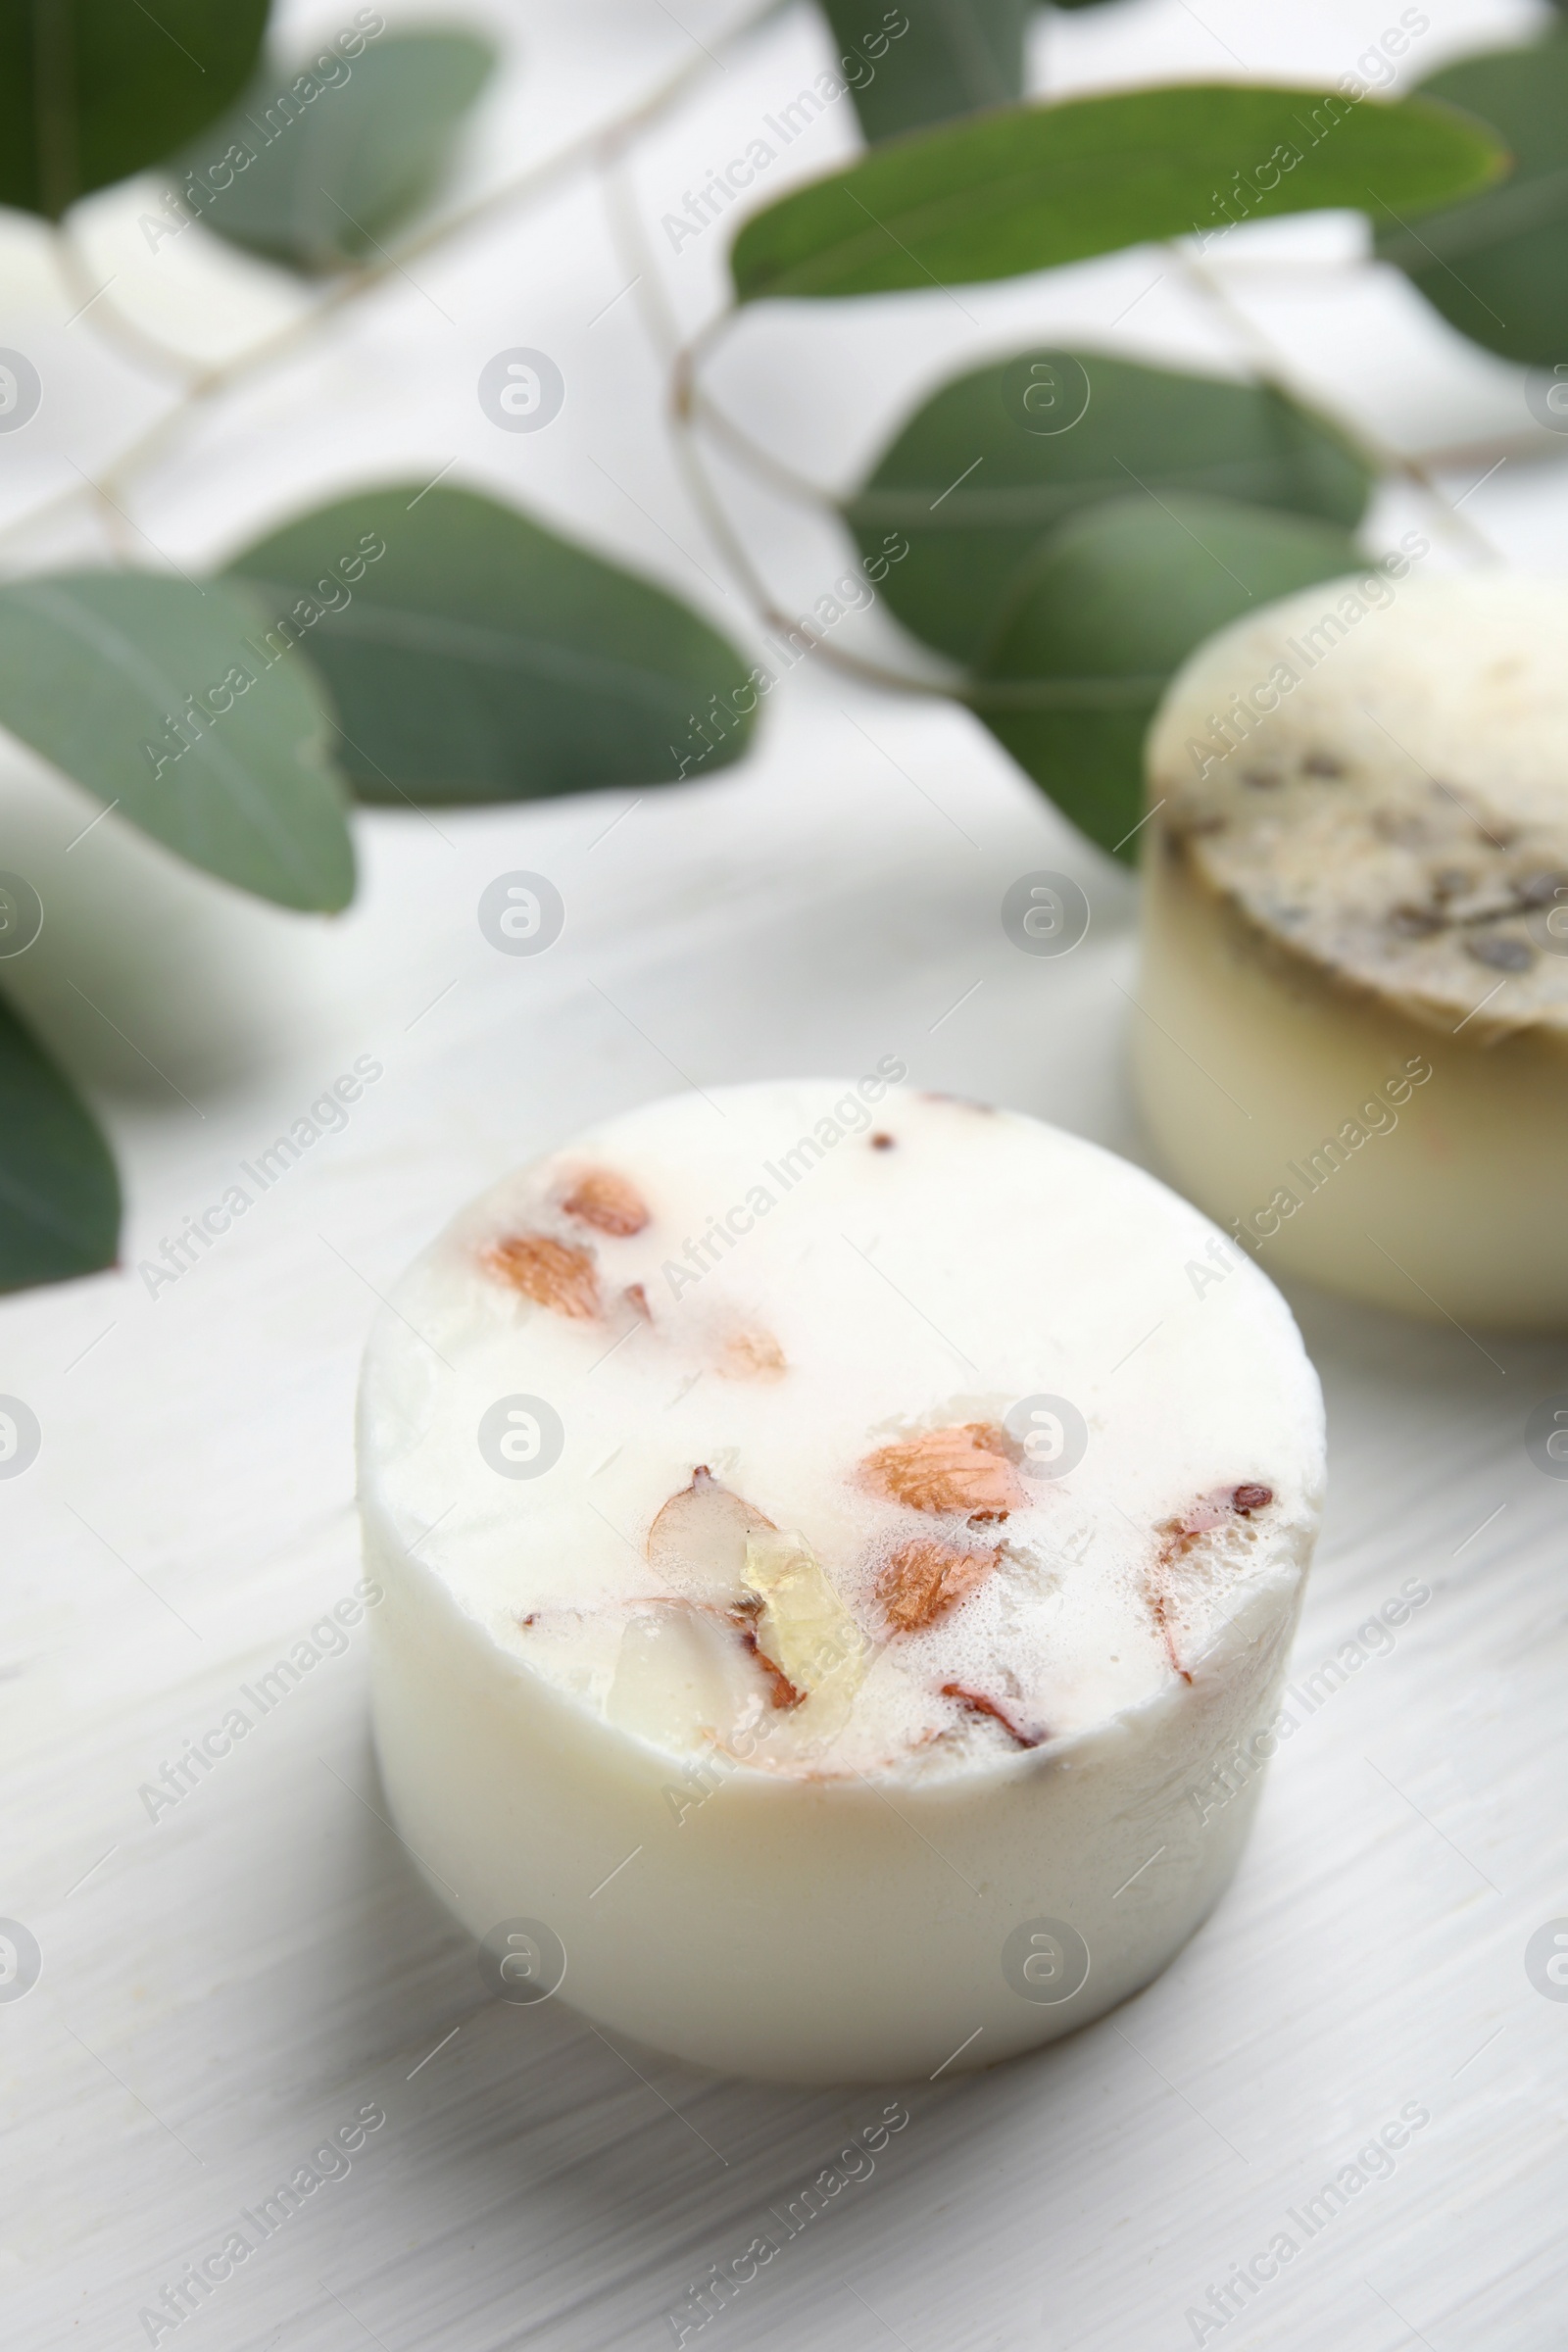 Photo of Soap bar and green leaves on white wooden table. Eco friendly personal care product